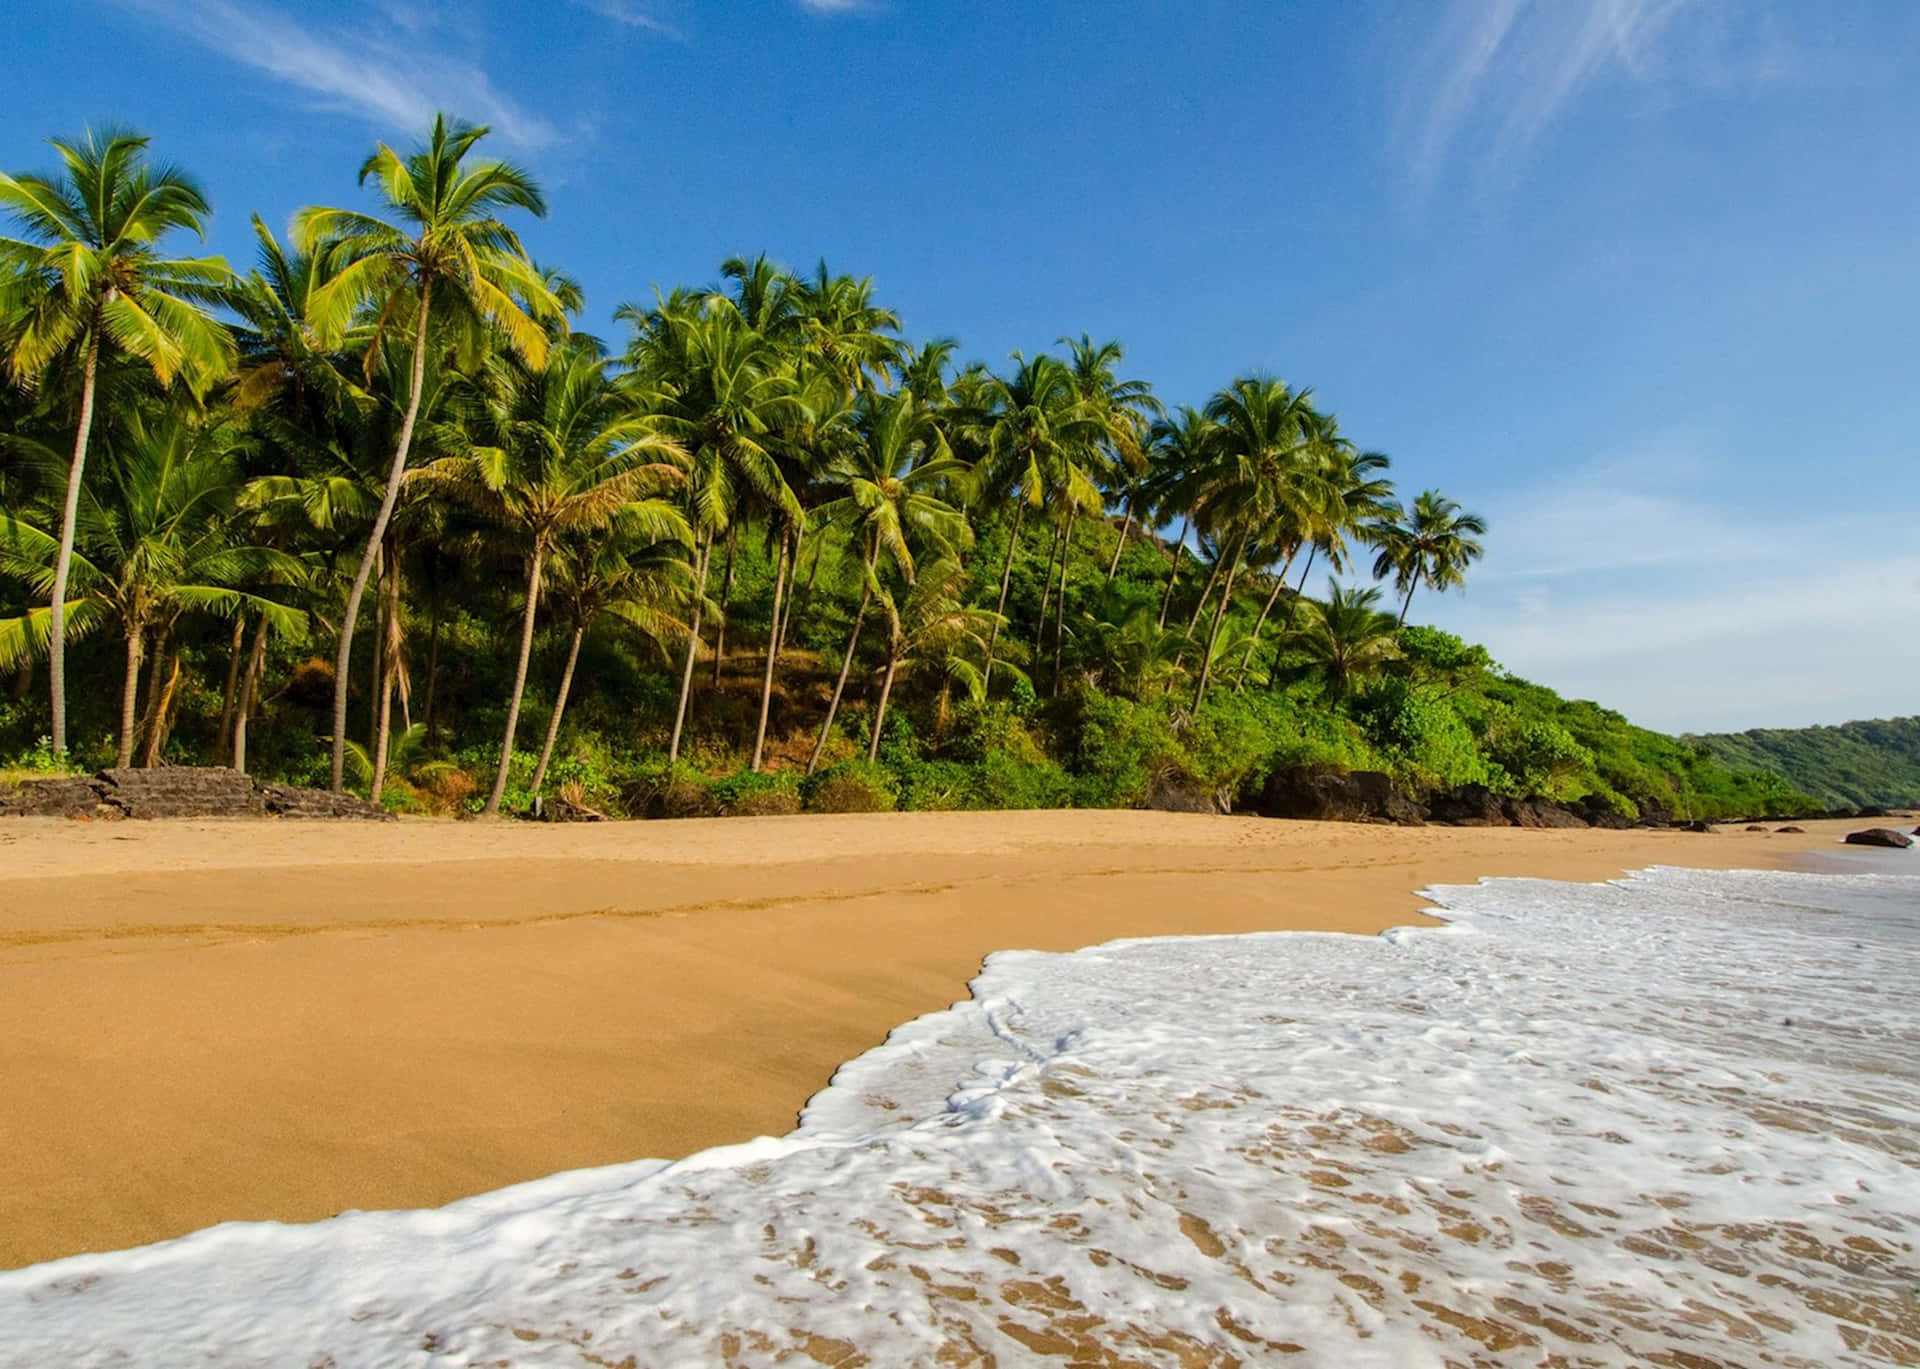 A Sandy Beach With Palm Trees And Waves